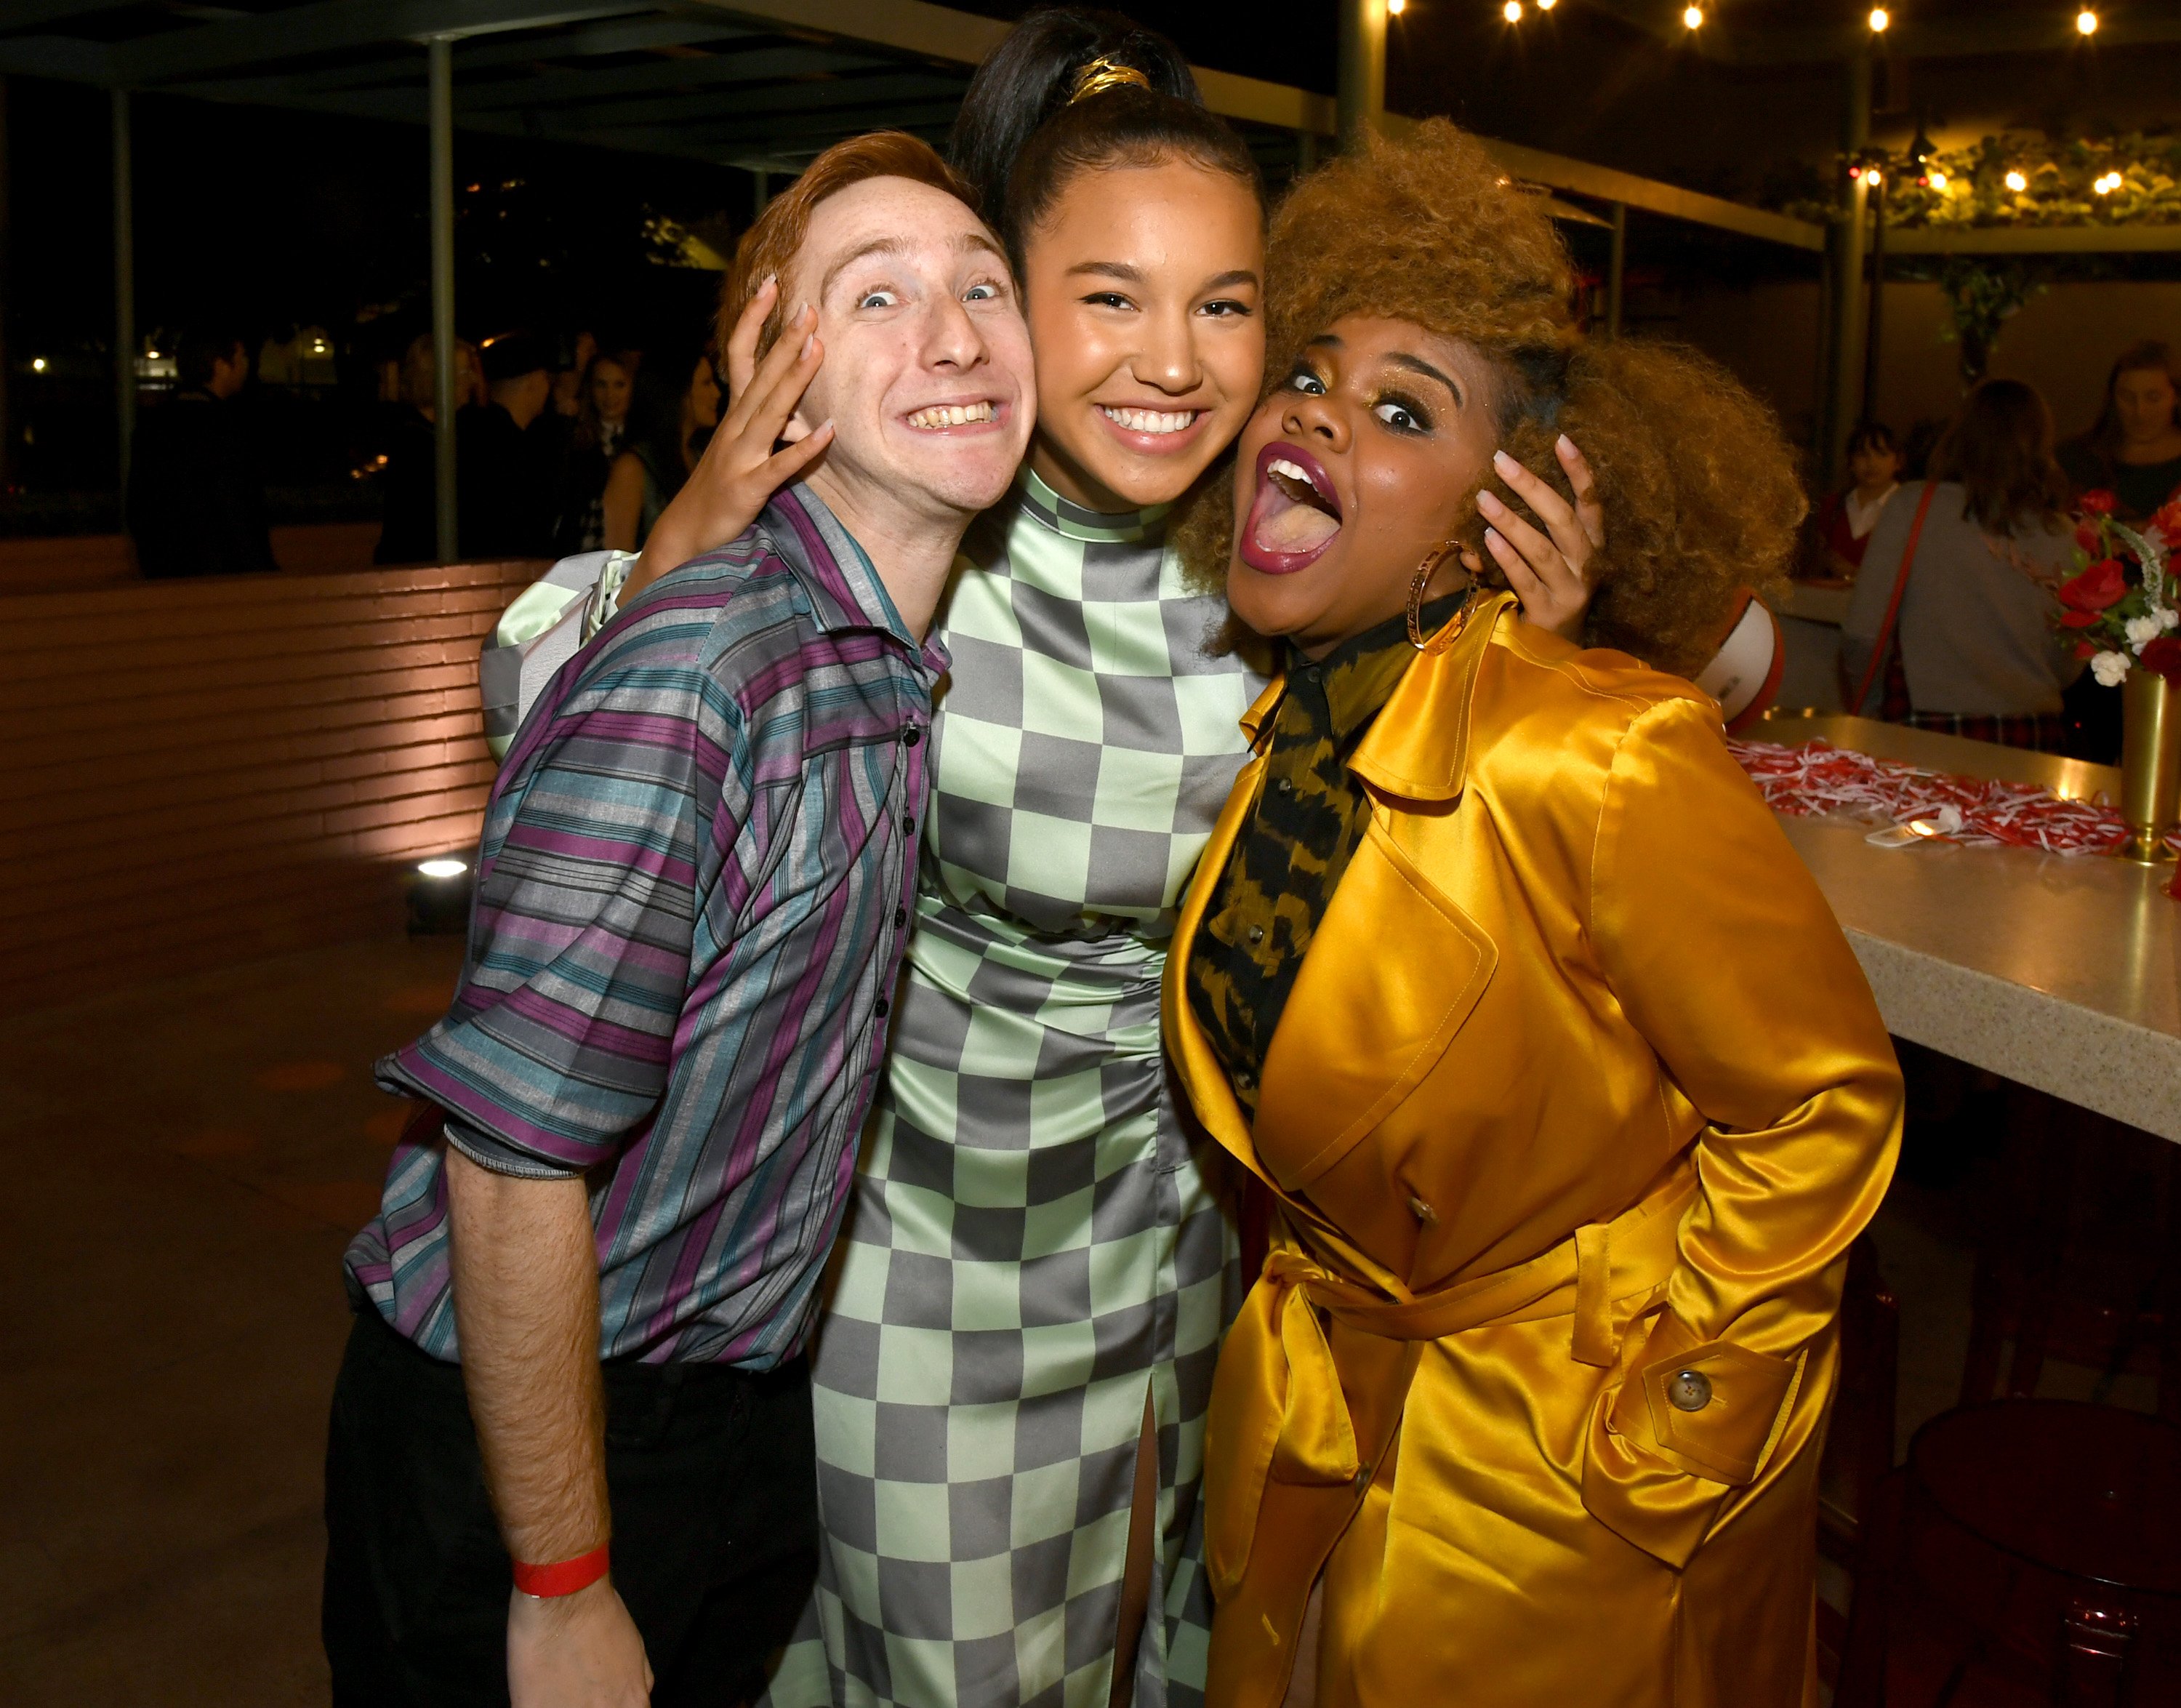 Larry Saperstein, Sofia Wylie and Dara Reneé pose at the after party for the premiere of Disney+'s 'High School Musical: The Musical: The Series'